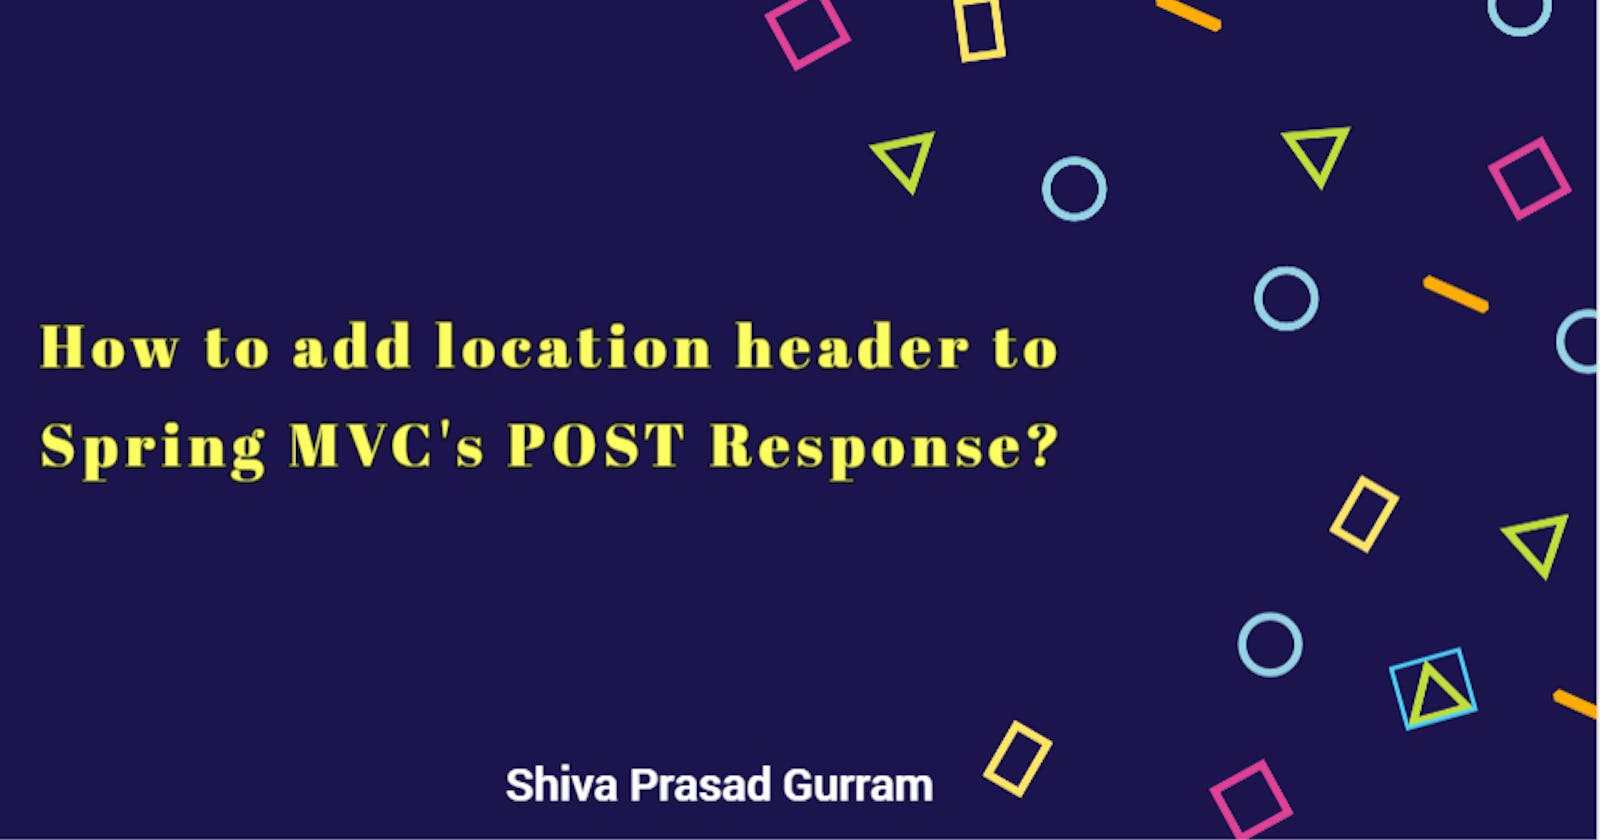 How to add location header to Spring MVC's POST Response?